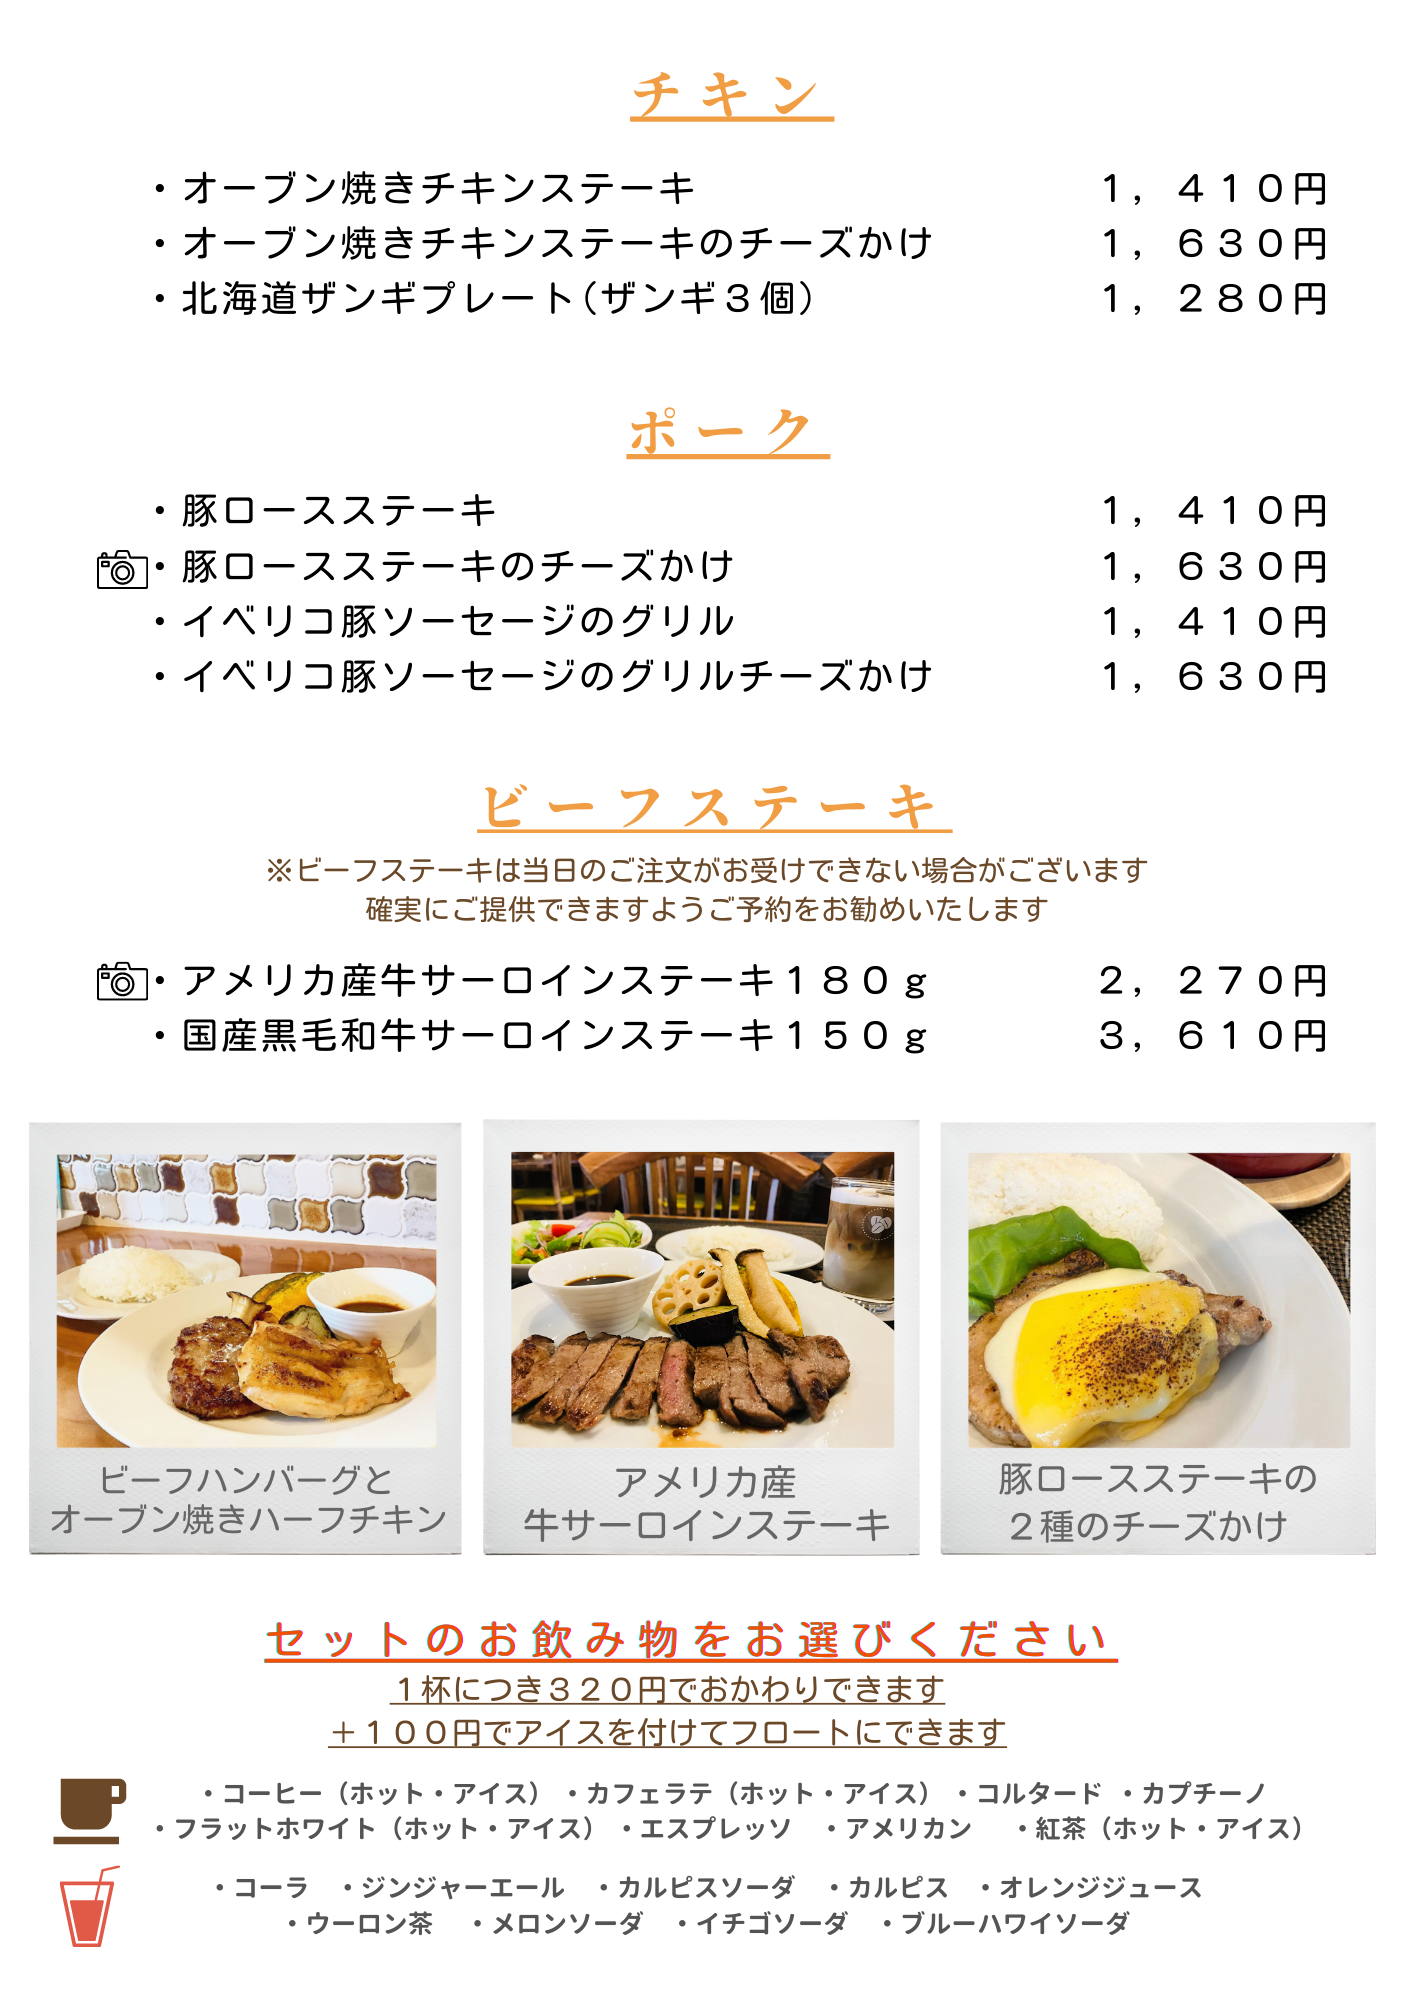 Cafe ＆ Curry HYGGE Grill　こだわりグリル